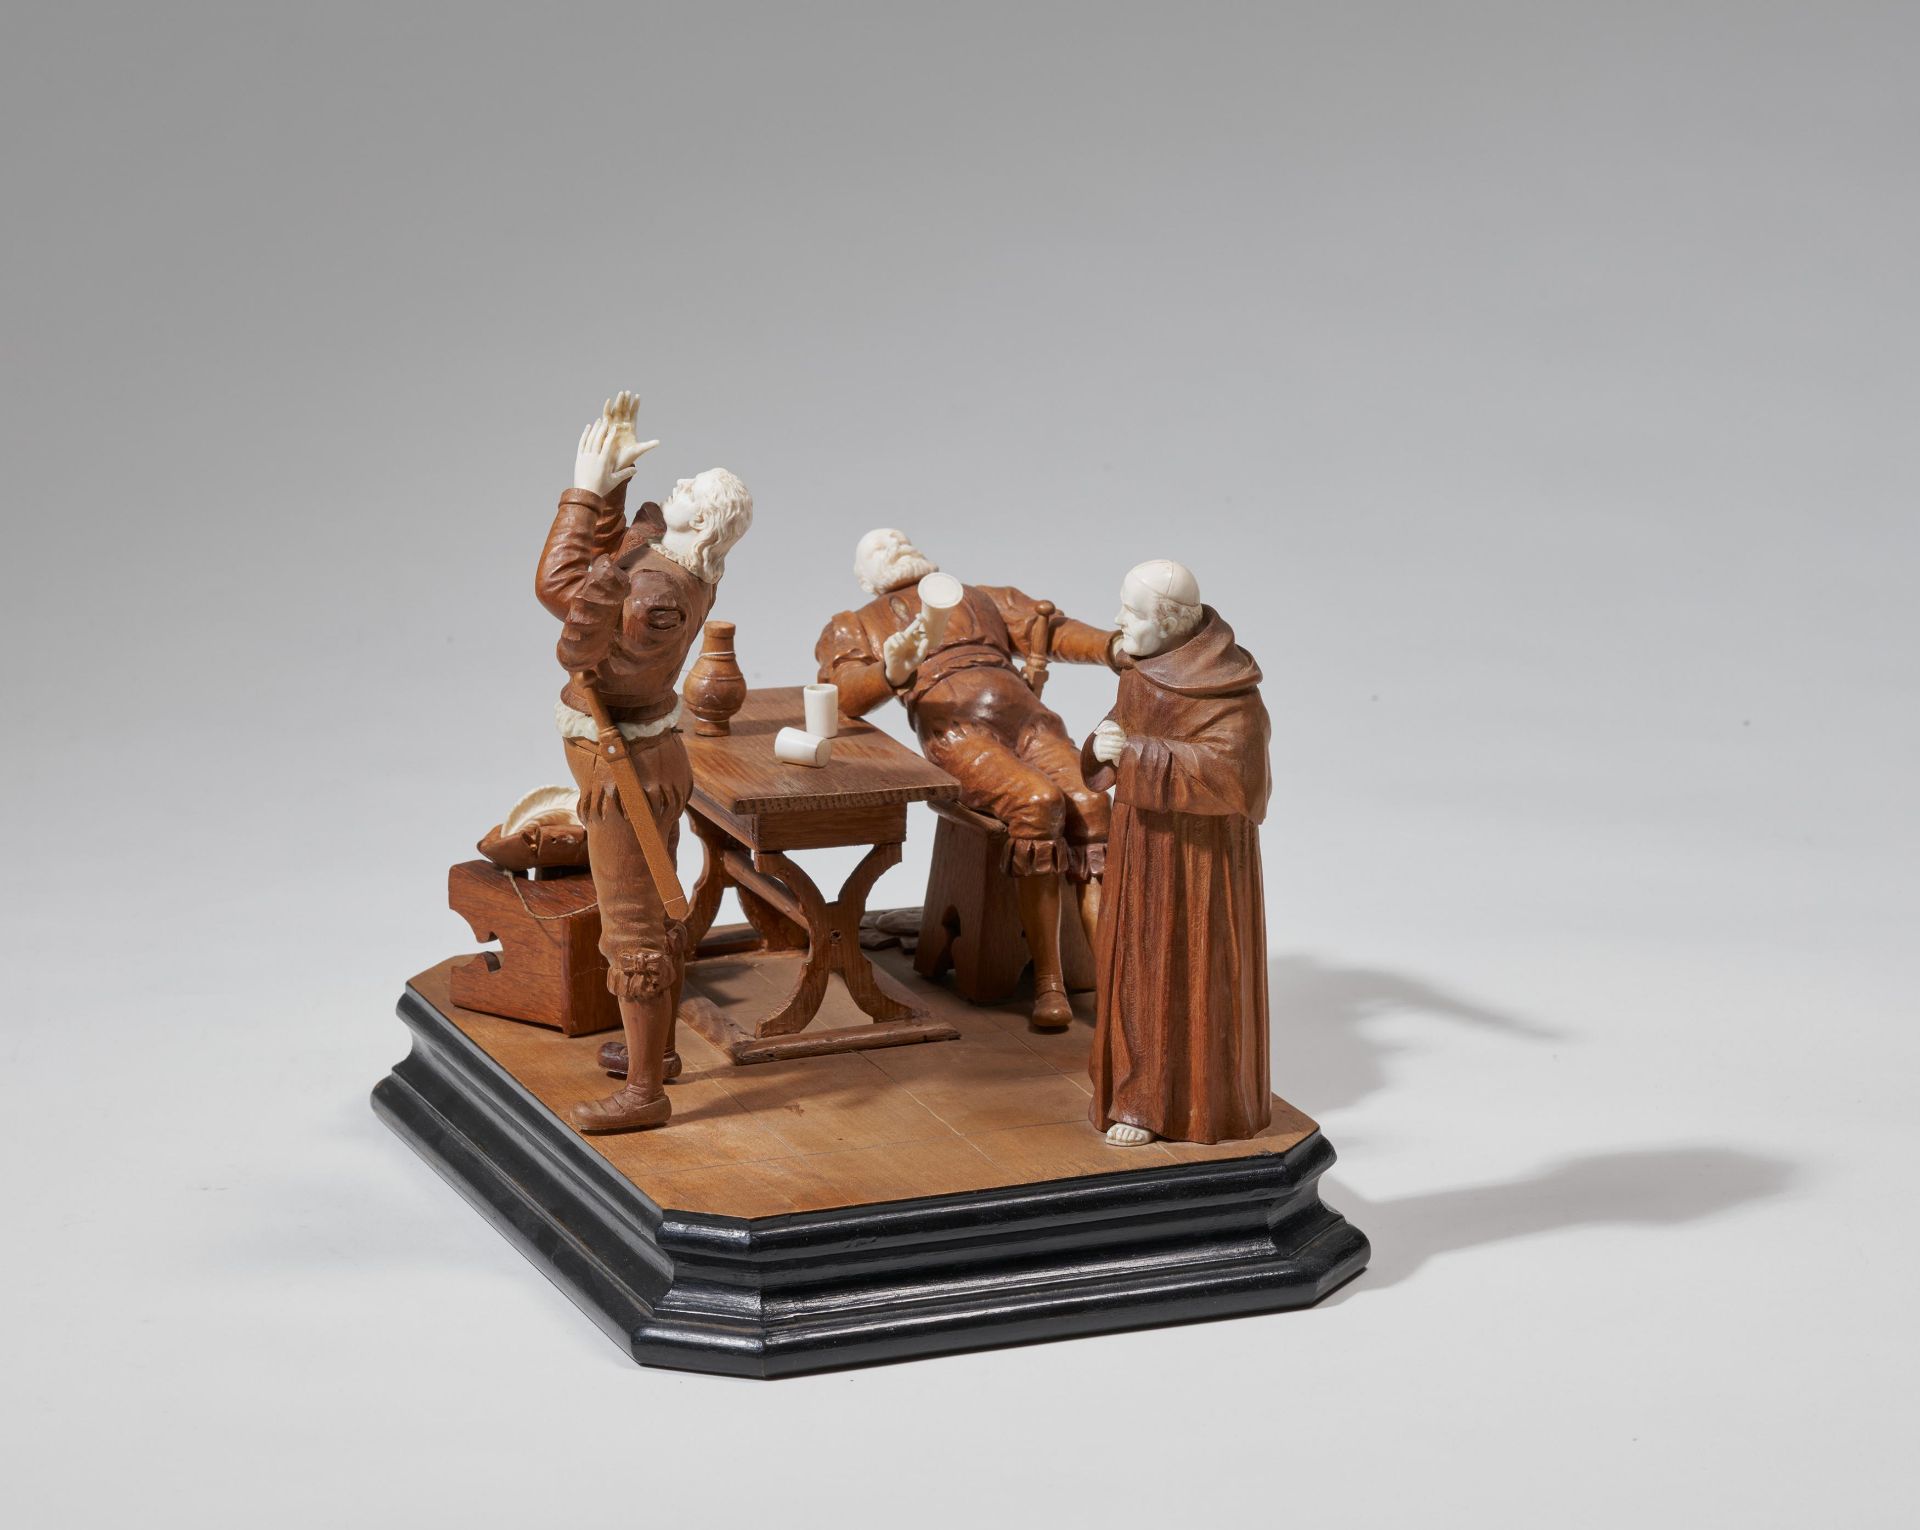 Drinking spree made of ivory and wood - Image 4 of 4